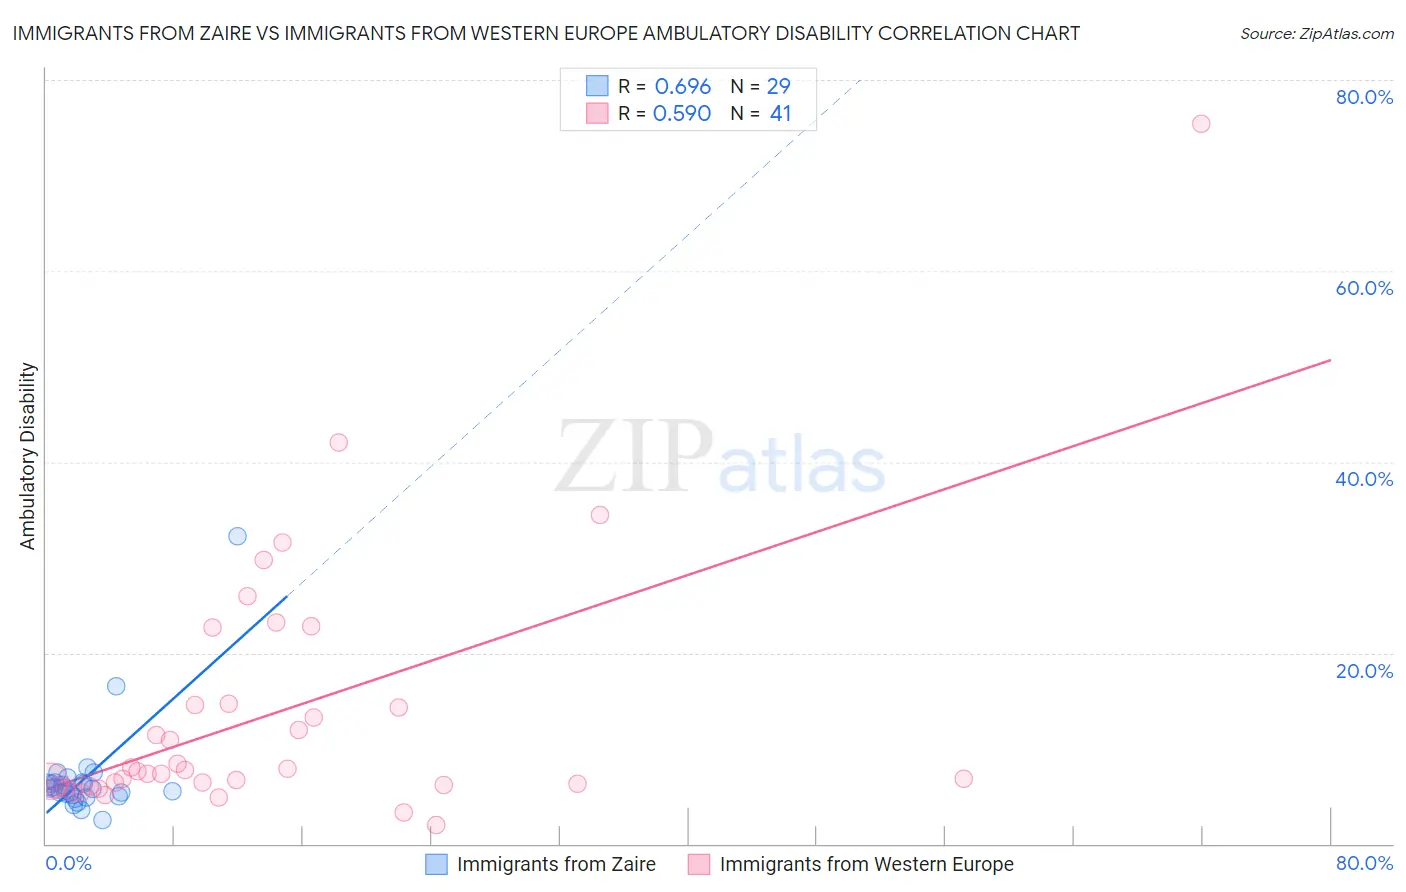 Immigrants from Zaire vs Immigrants from Western Europe Ambulatory Disability